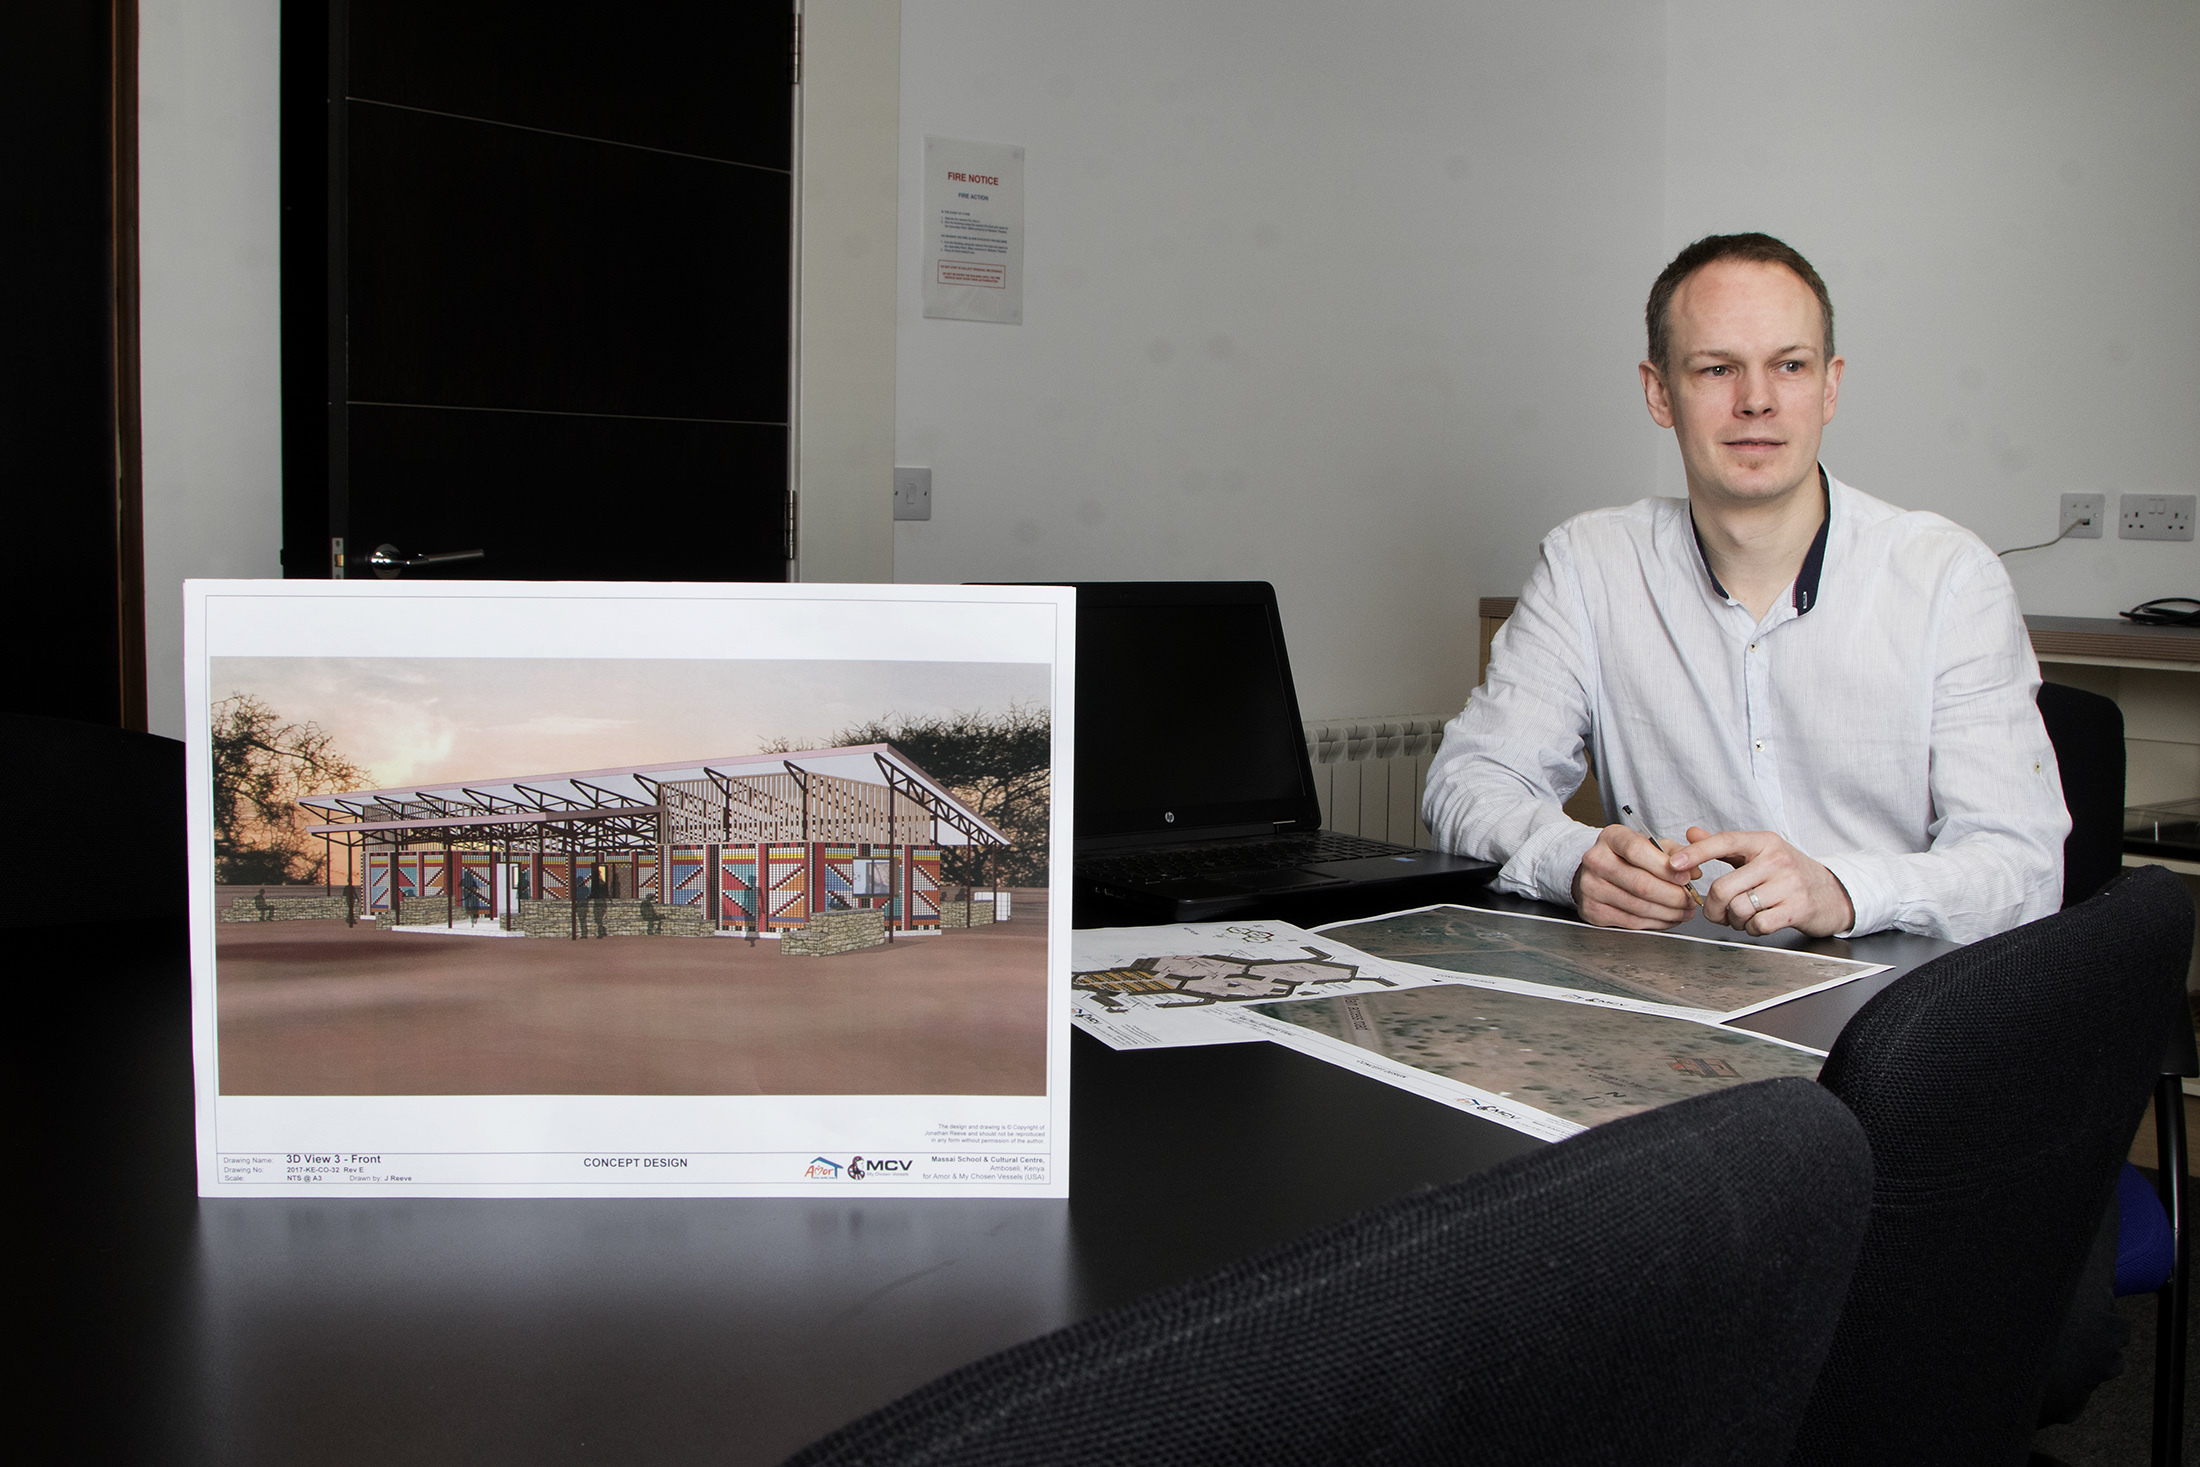 Jonathan Reeve is heading to Kenya on March 13 to present designs for a building for the Maasai tribe